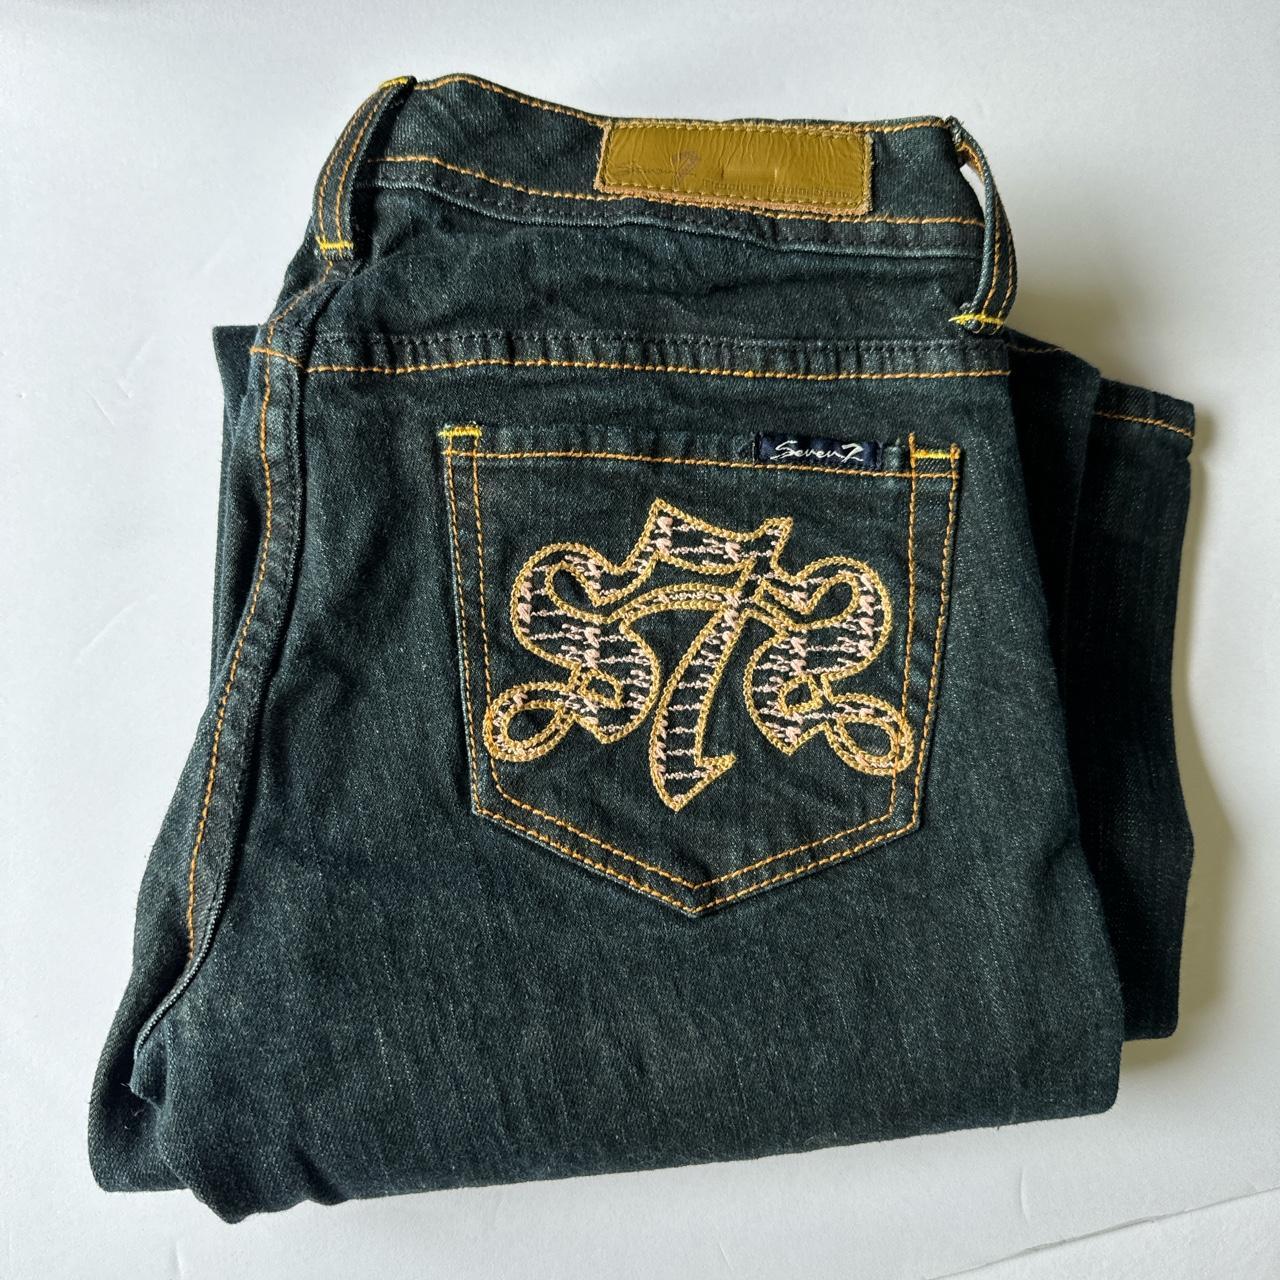 seven7 jeans! mint condition mid rise jeans. theyre - Depop